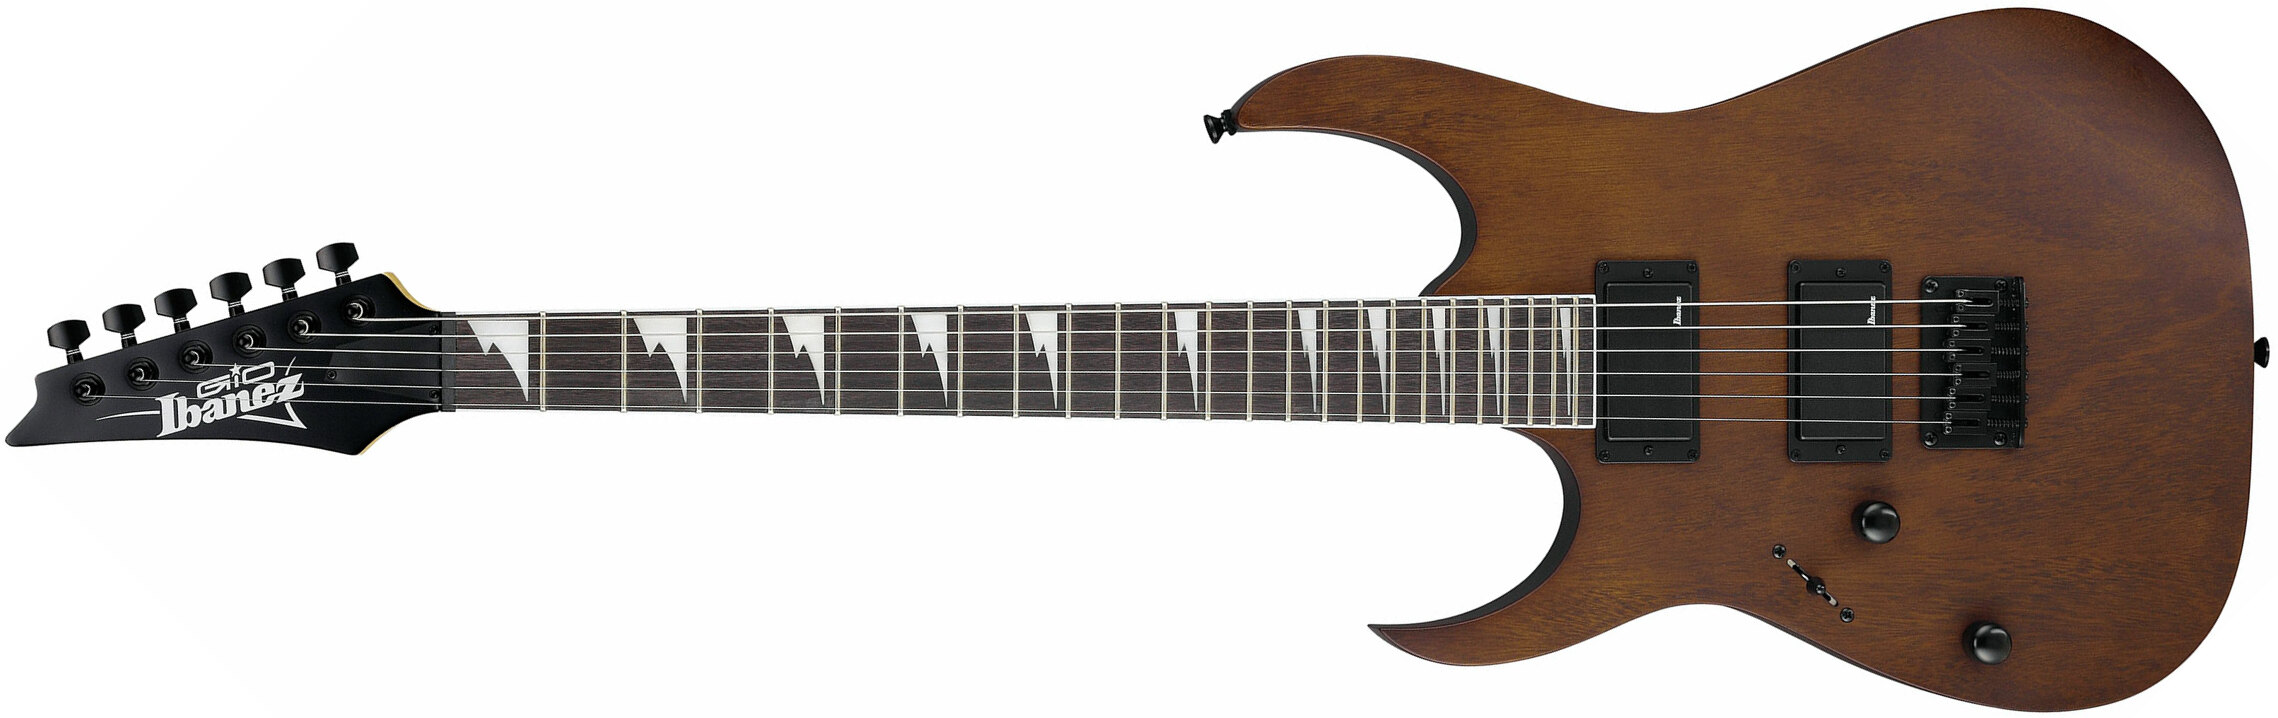 Ibanez Grg121dxl Wnf Gio Hh Ht Pur - Walnut Flat - Left-handed electric guitar - Main picture